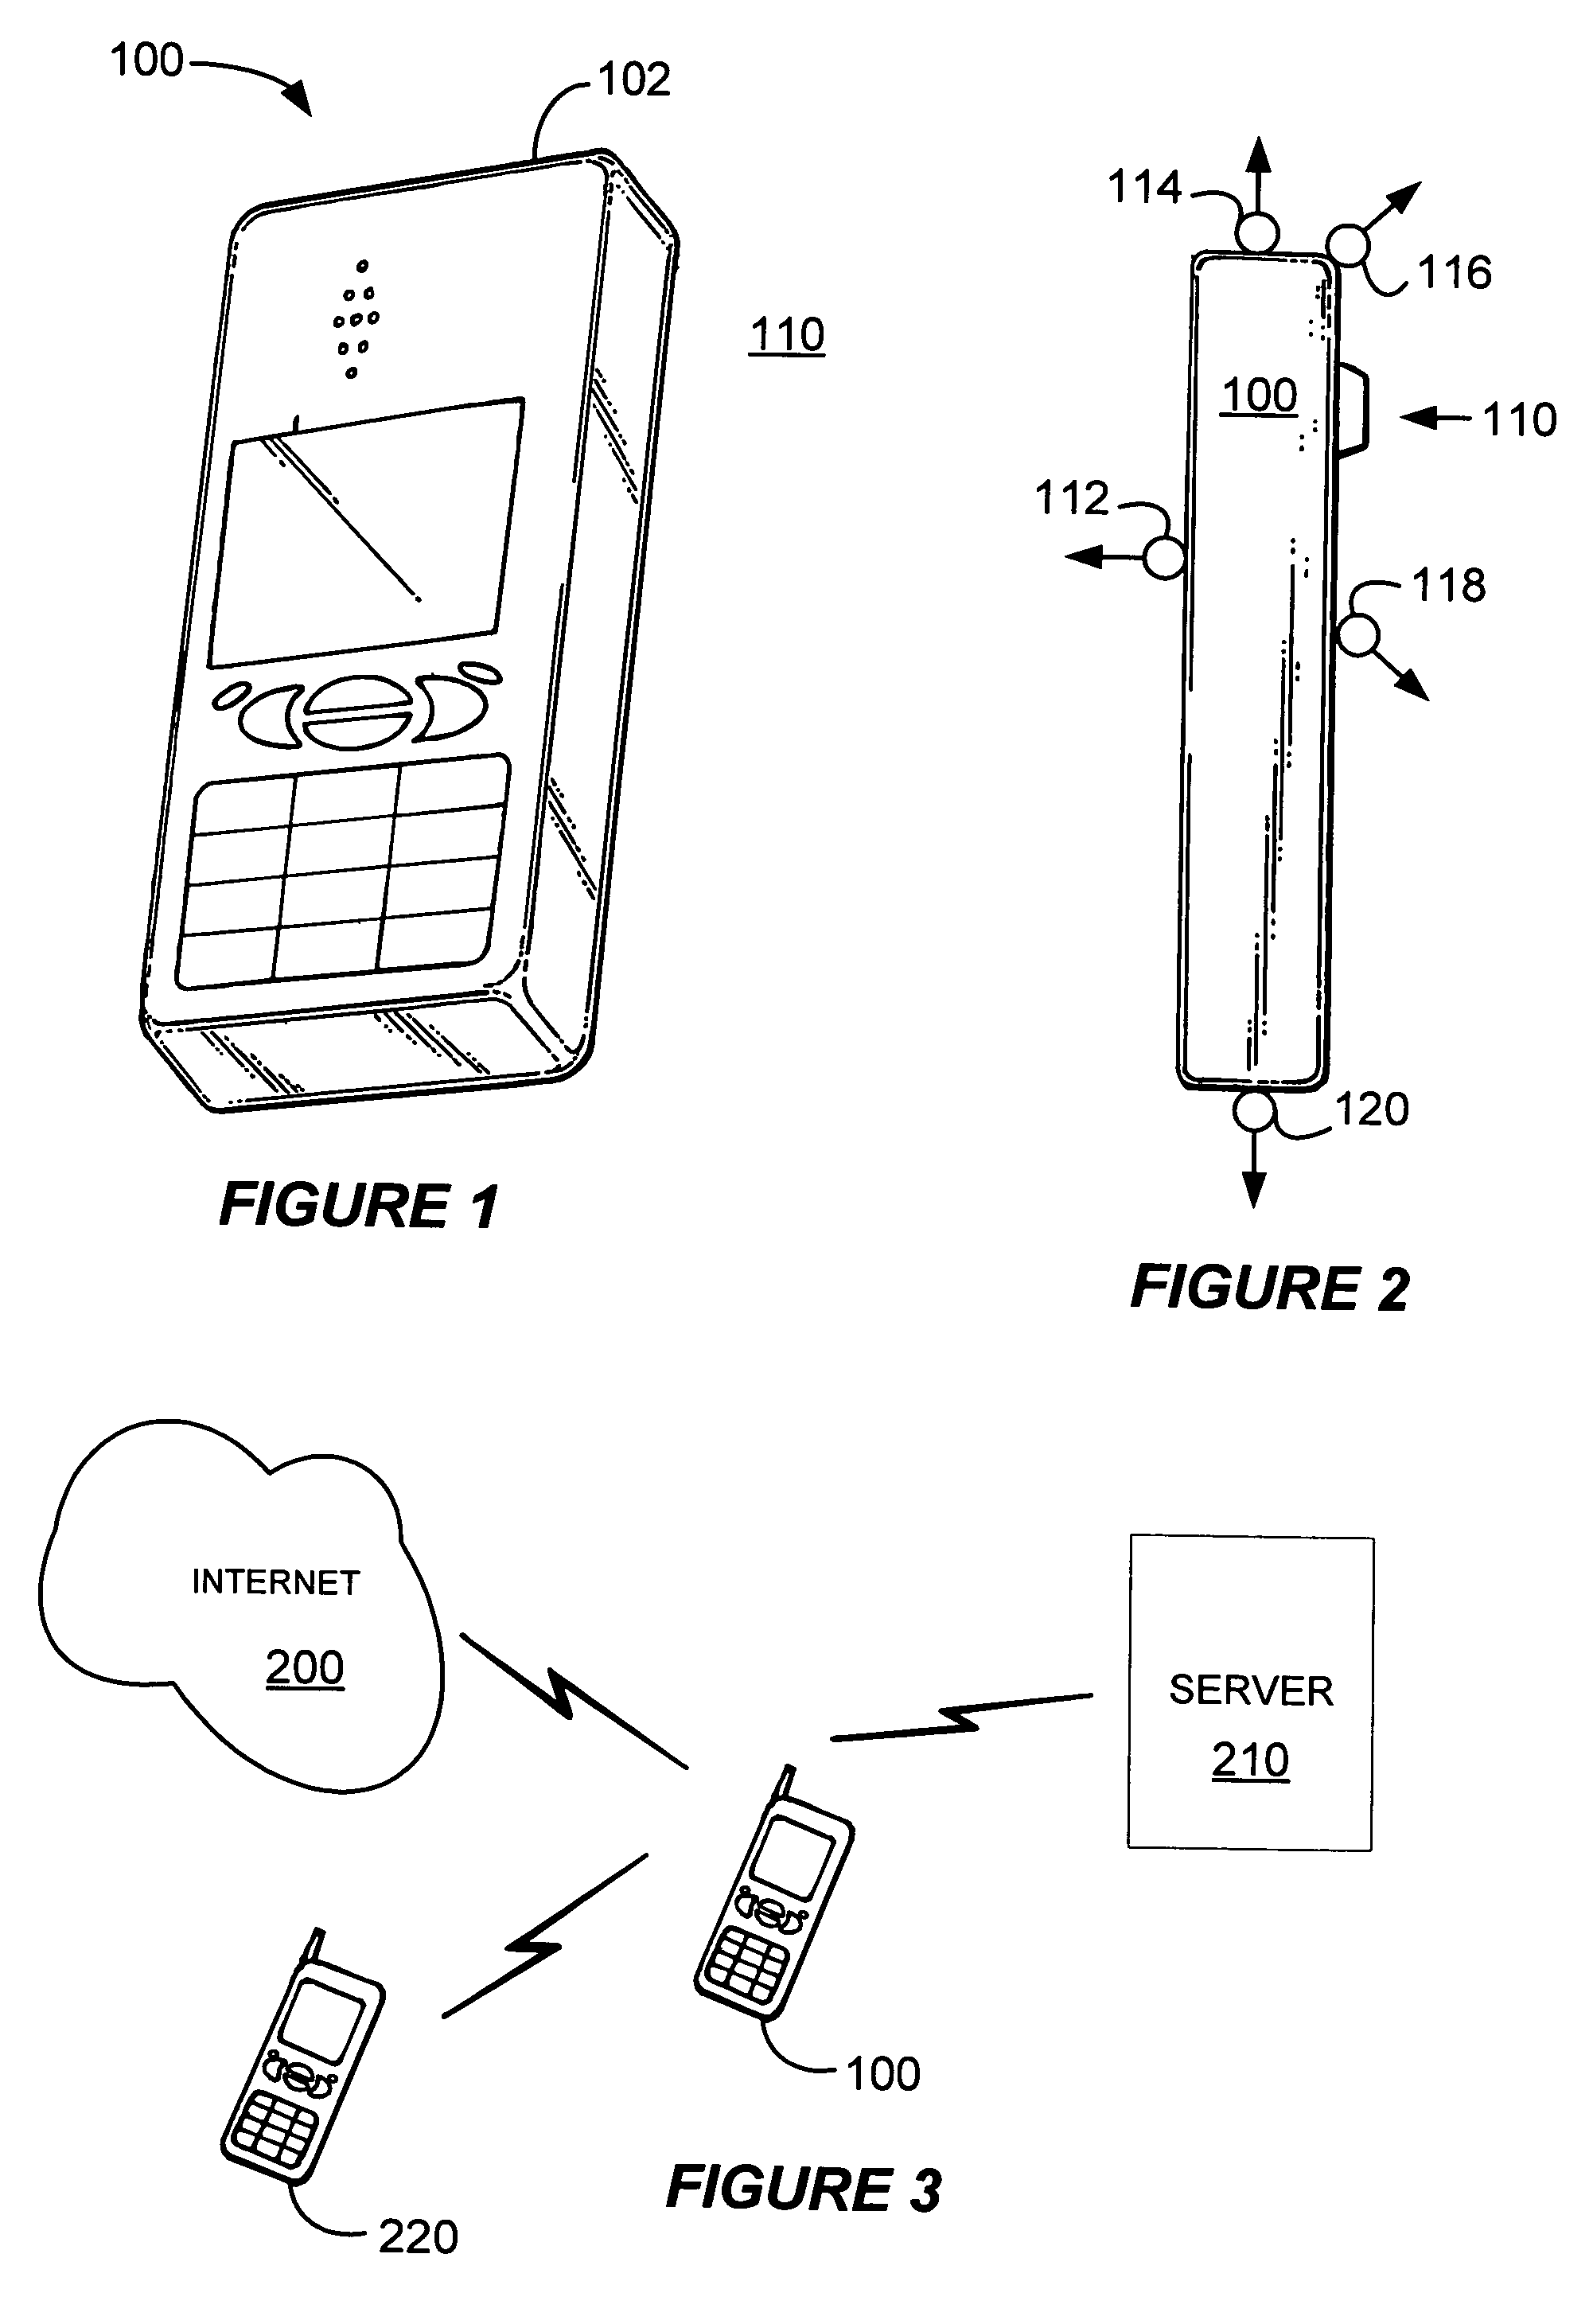 Fast capture and transmission of information in a portable device